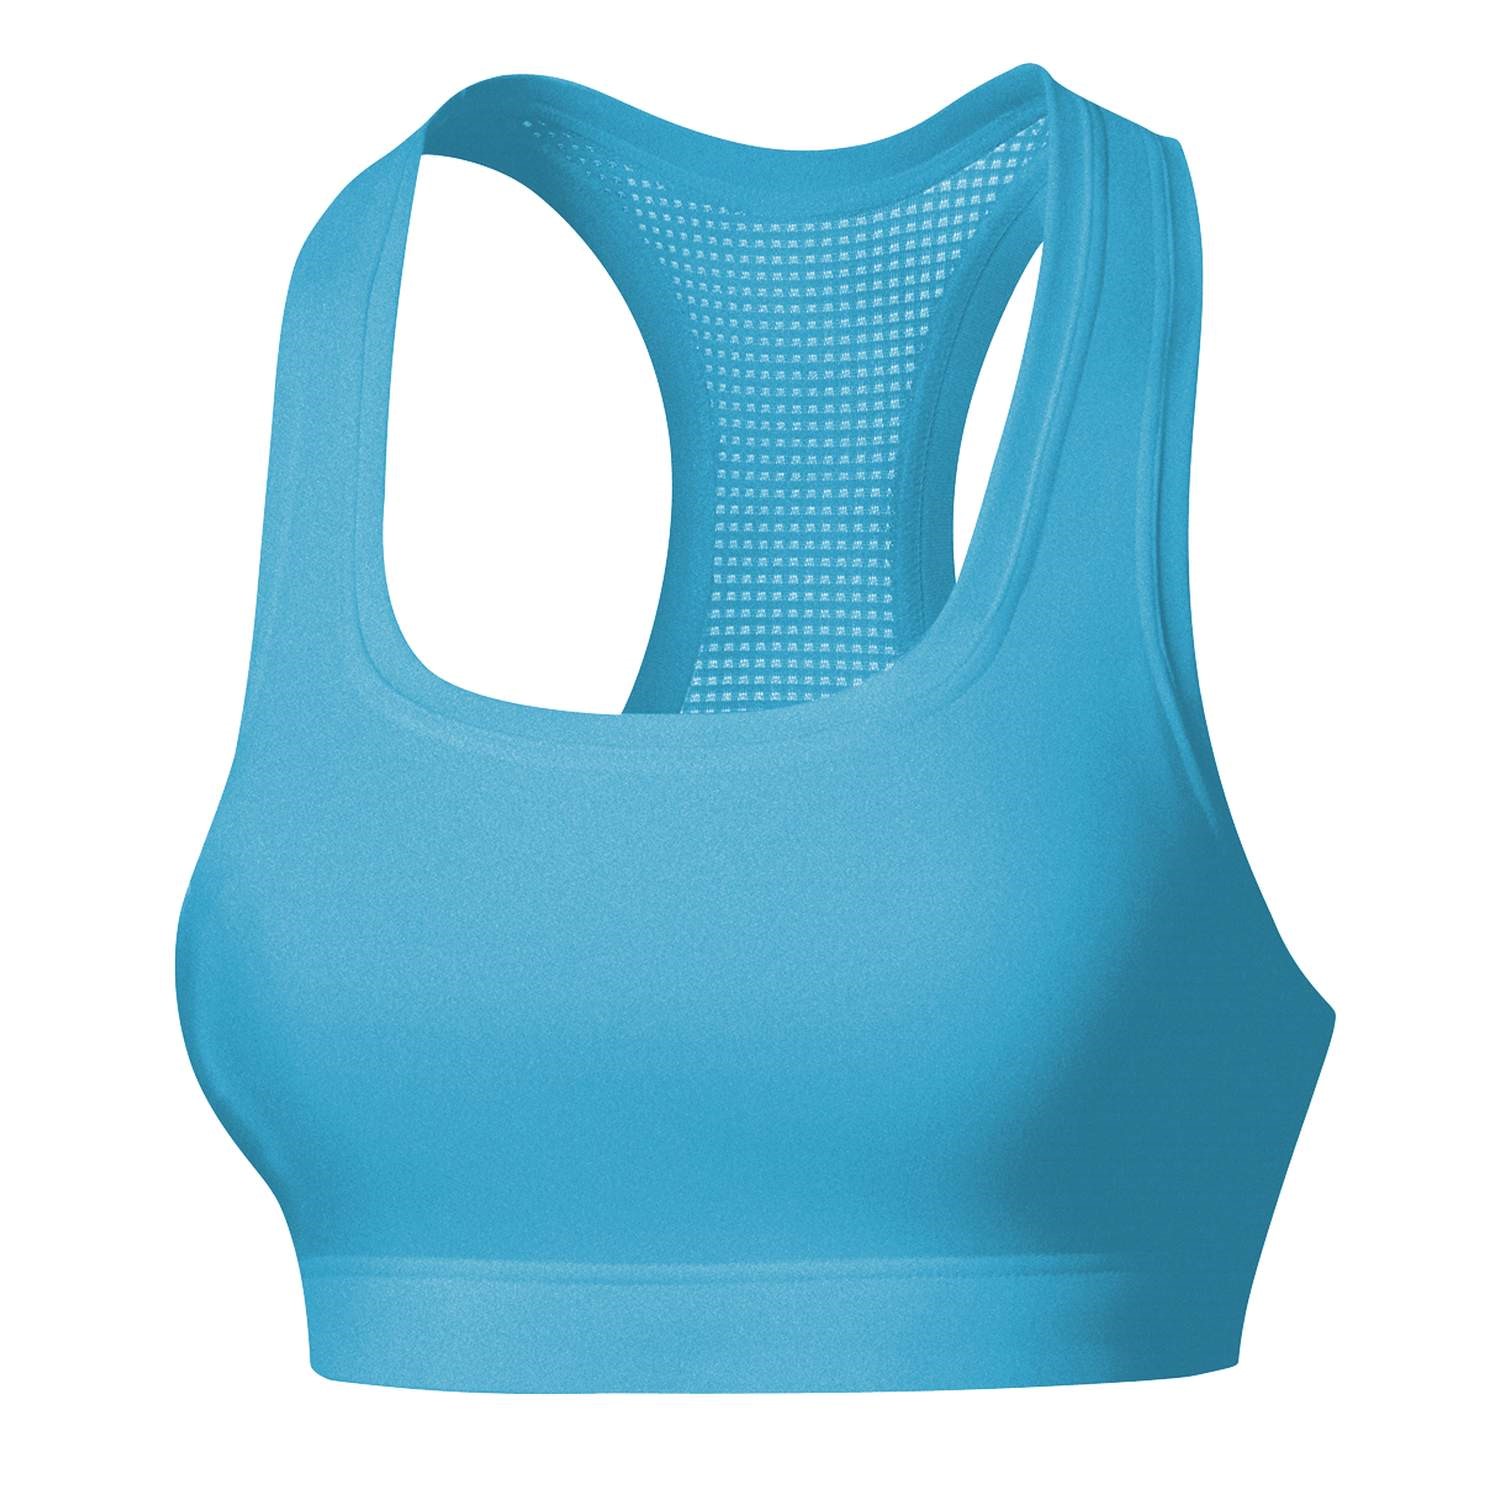 Casall Iconic Sports Bra C/D Blue - Sports-bh - Sports-bh - Timarco.no